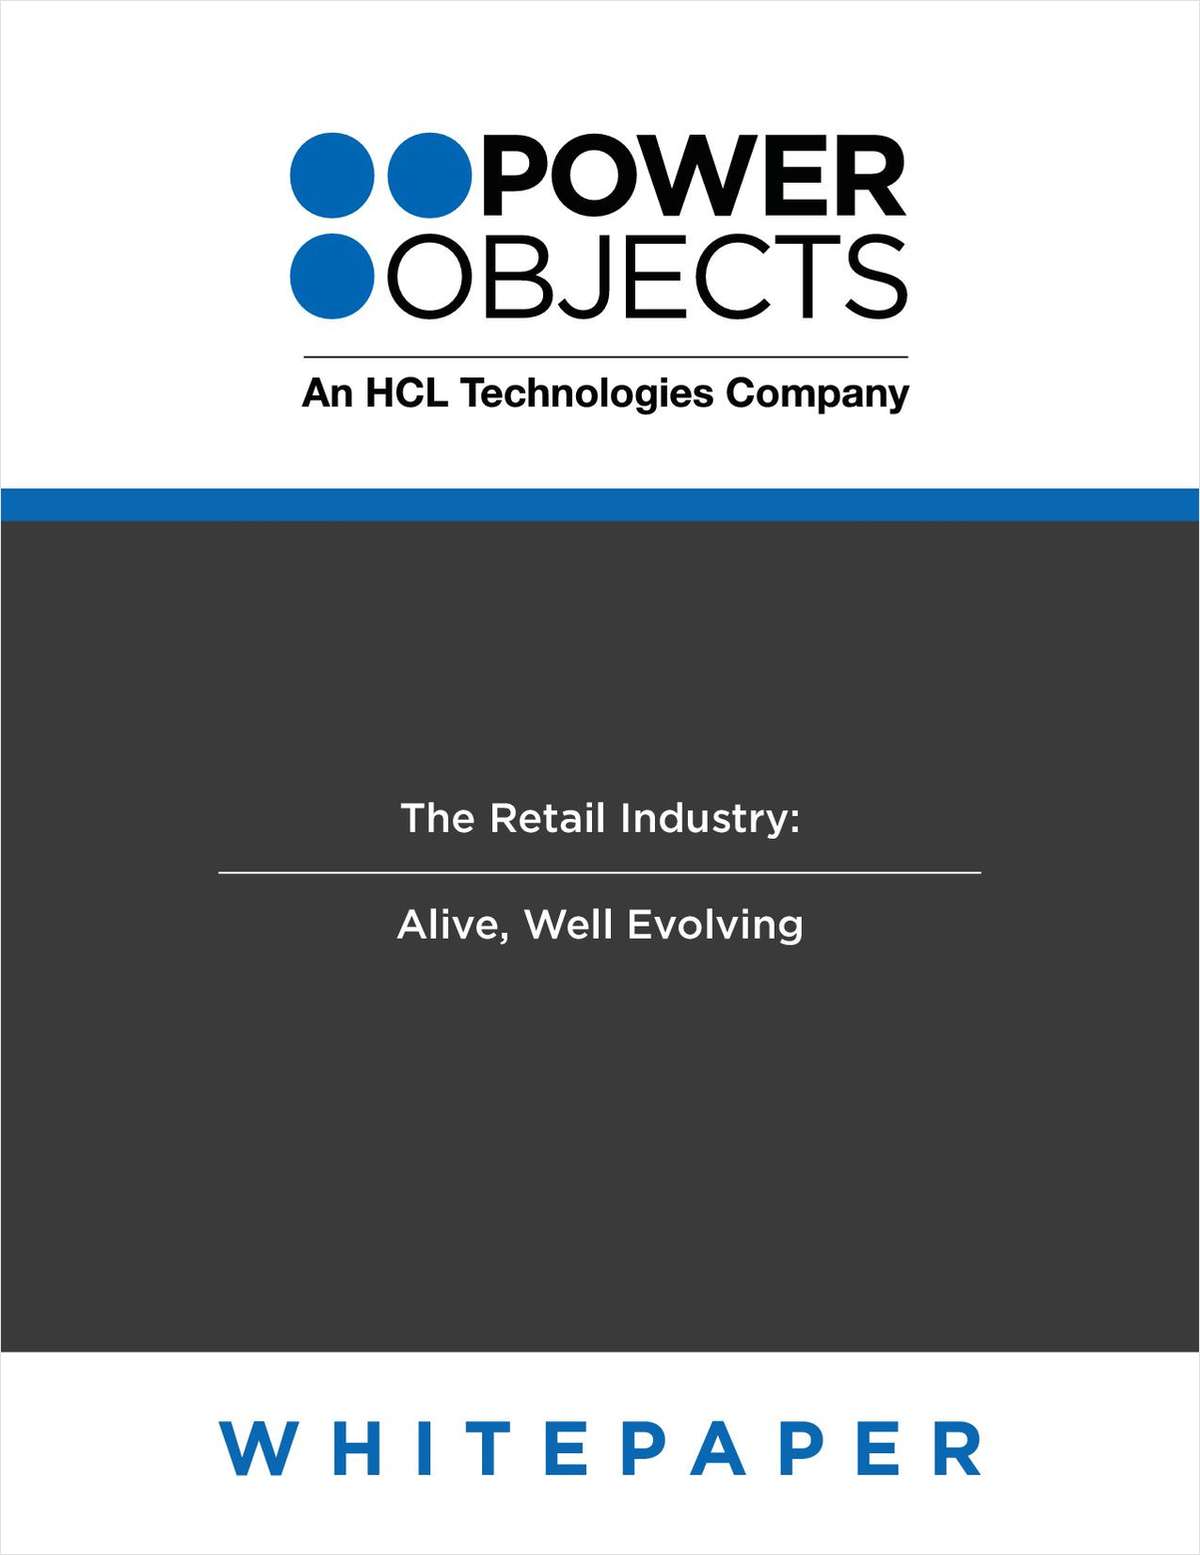 The Retail Industry: Alive, Well, Evolving - Leveraging Software to Support the Growth of Brick and Mortar